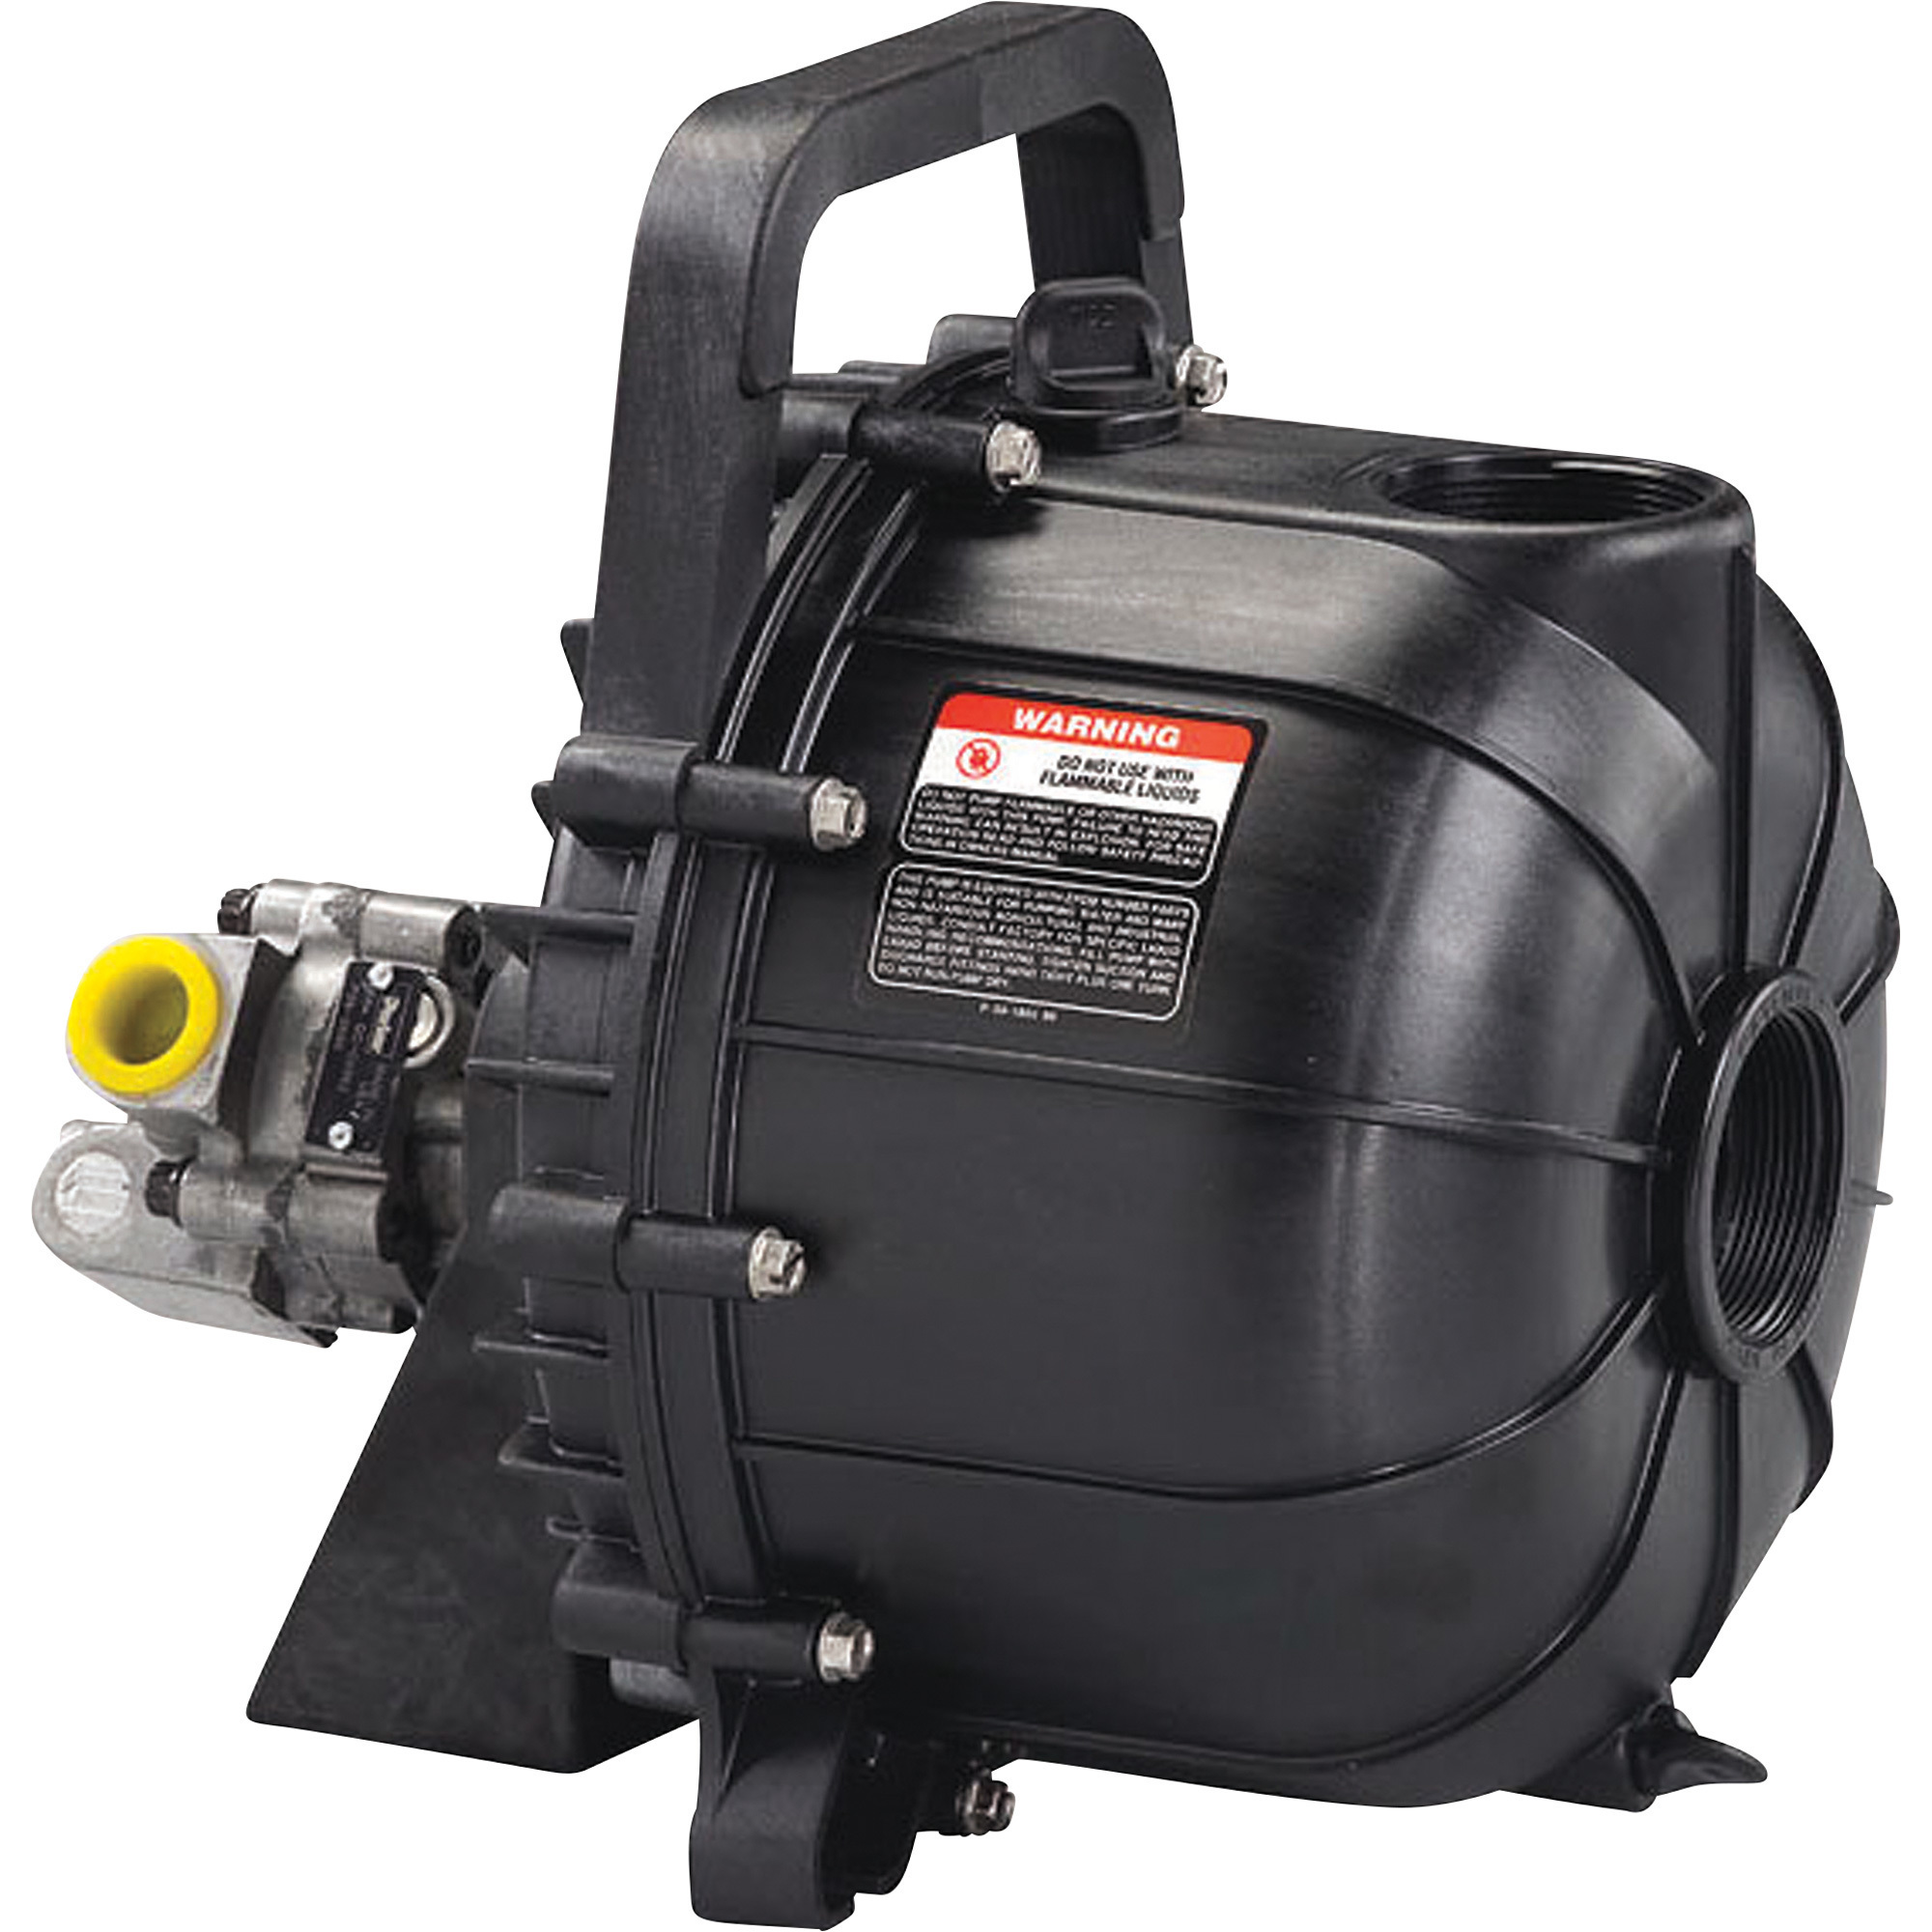 Pacer Self-Priming Centrifugal Water Pump, 14,400 GPH, 5 HP, 2Inch, Model SE2JL HYC